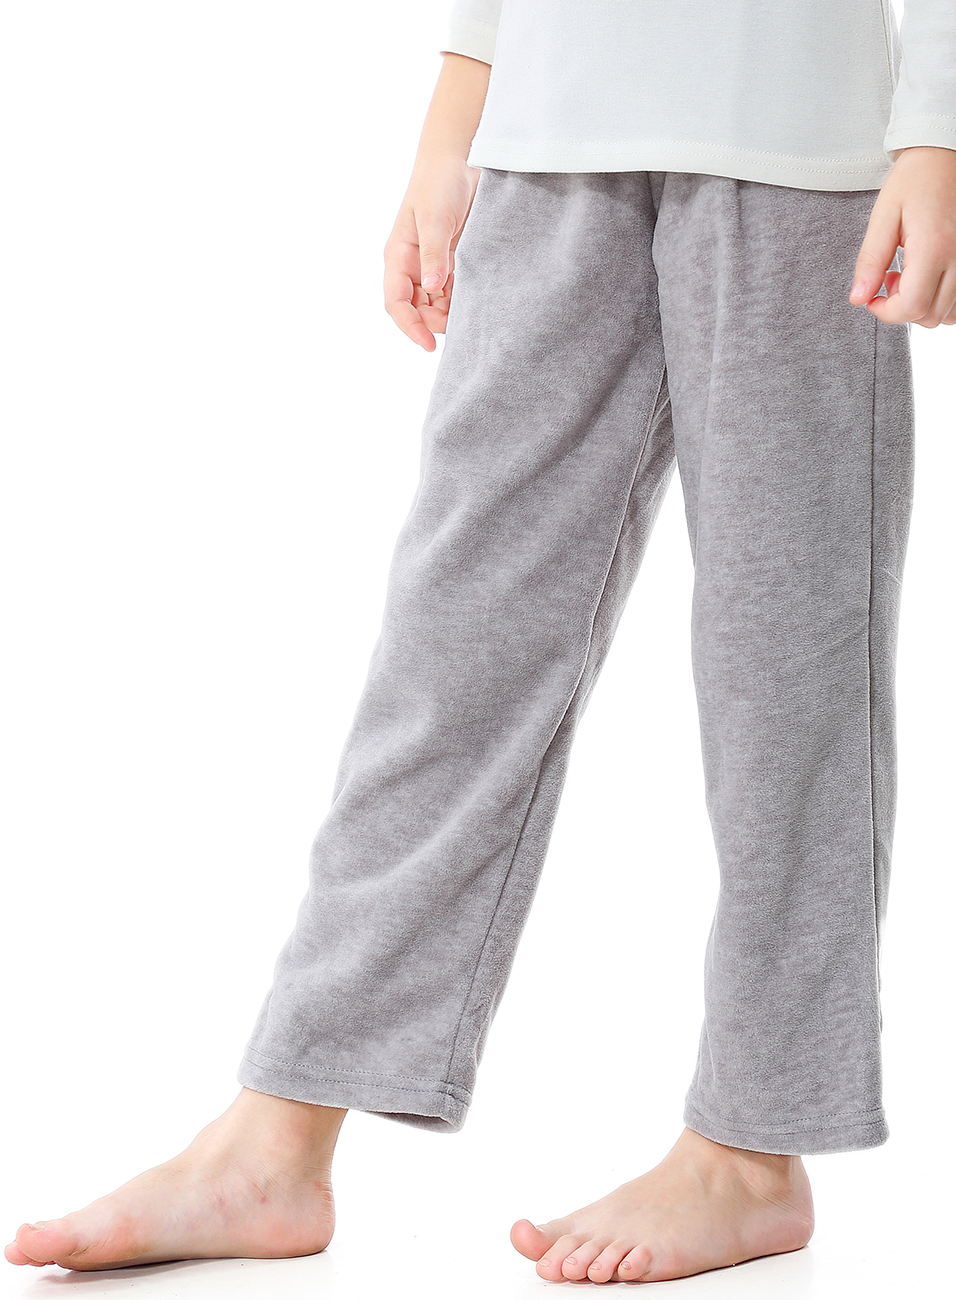 OLEH-OLEH Little Kid and Toddler Girl’s Pajama Bottoms Soft Casual Loose Fleece Lounge Pants Size 5 6 8 10 